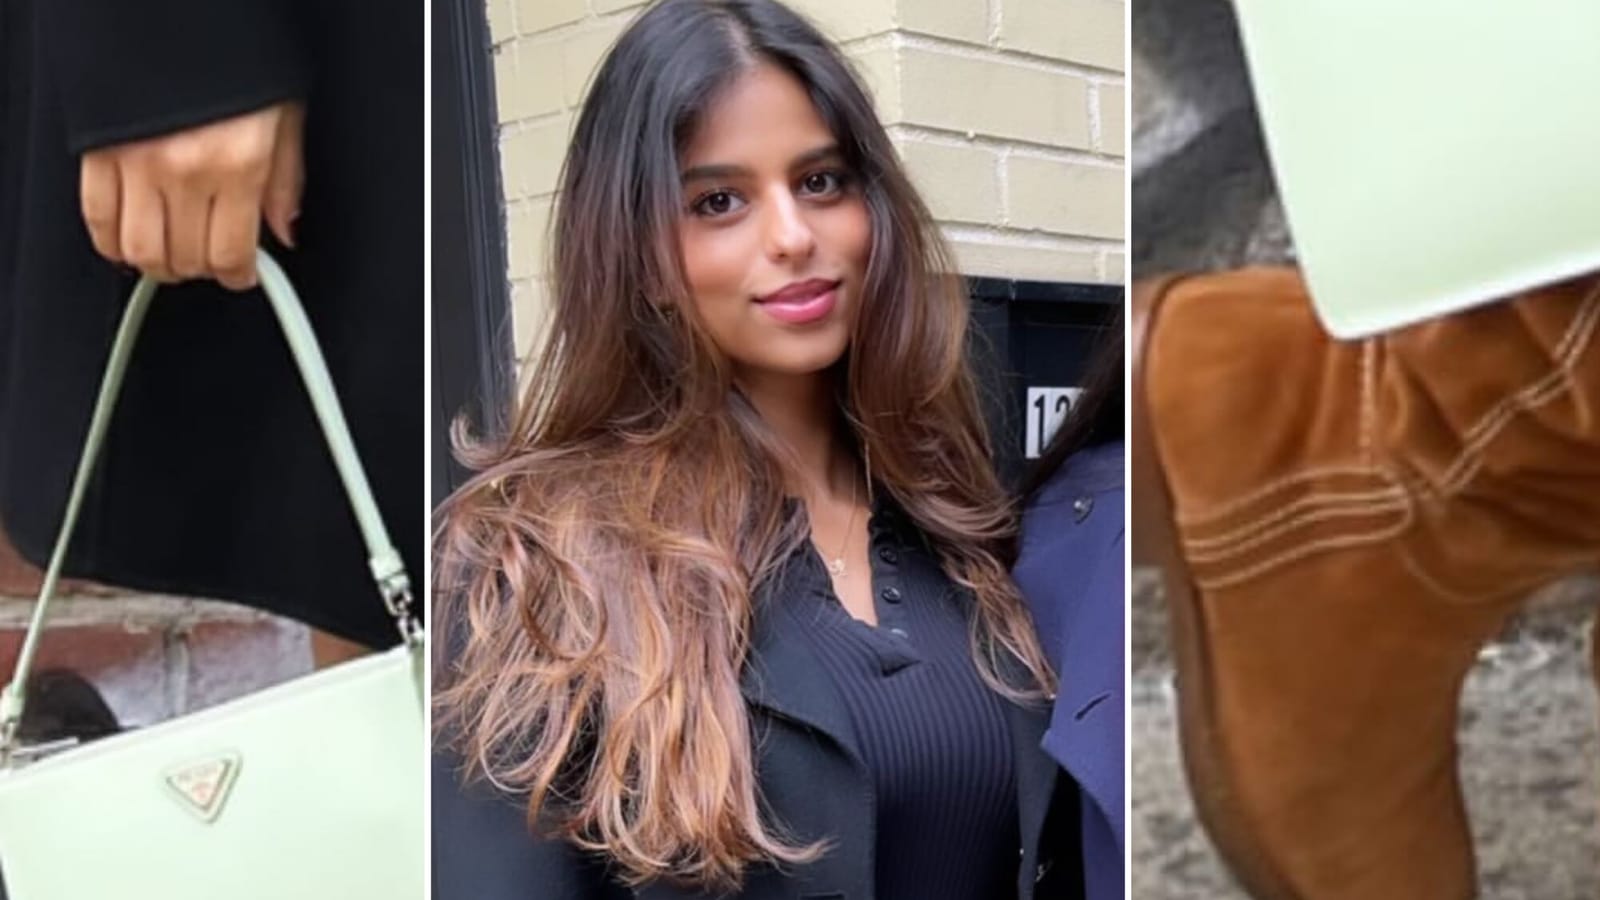 Style Steal] 3 super expensive handbags from Suhana Khan's